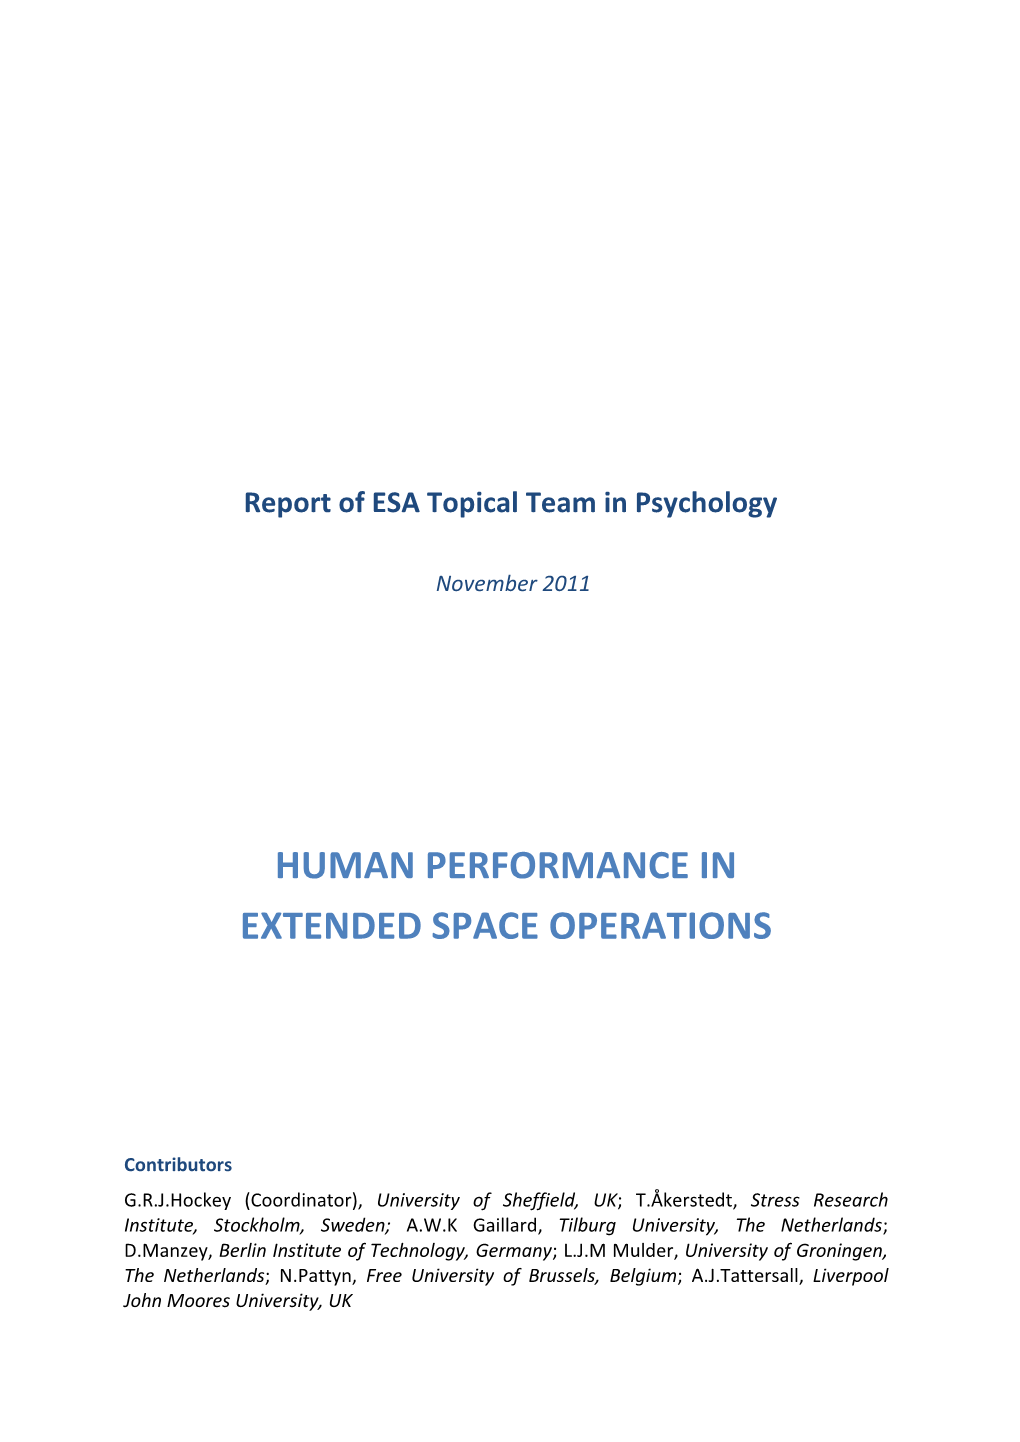 Human Performance in Extended Space Operations